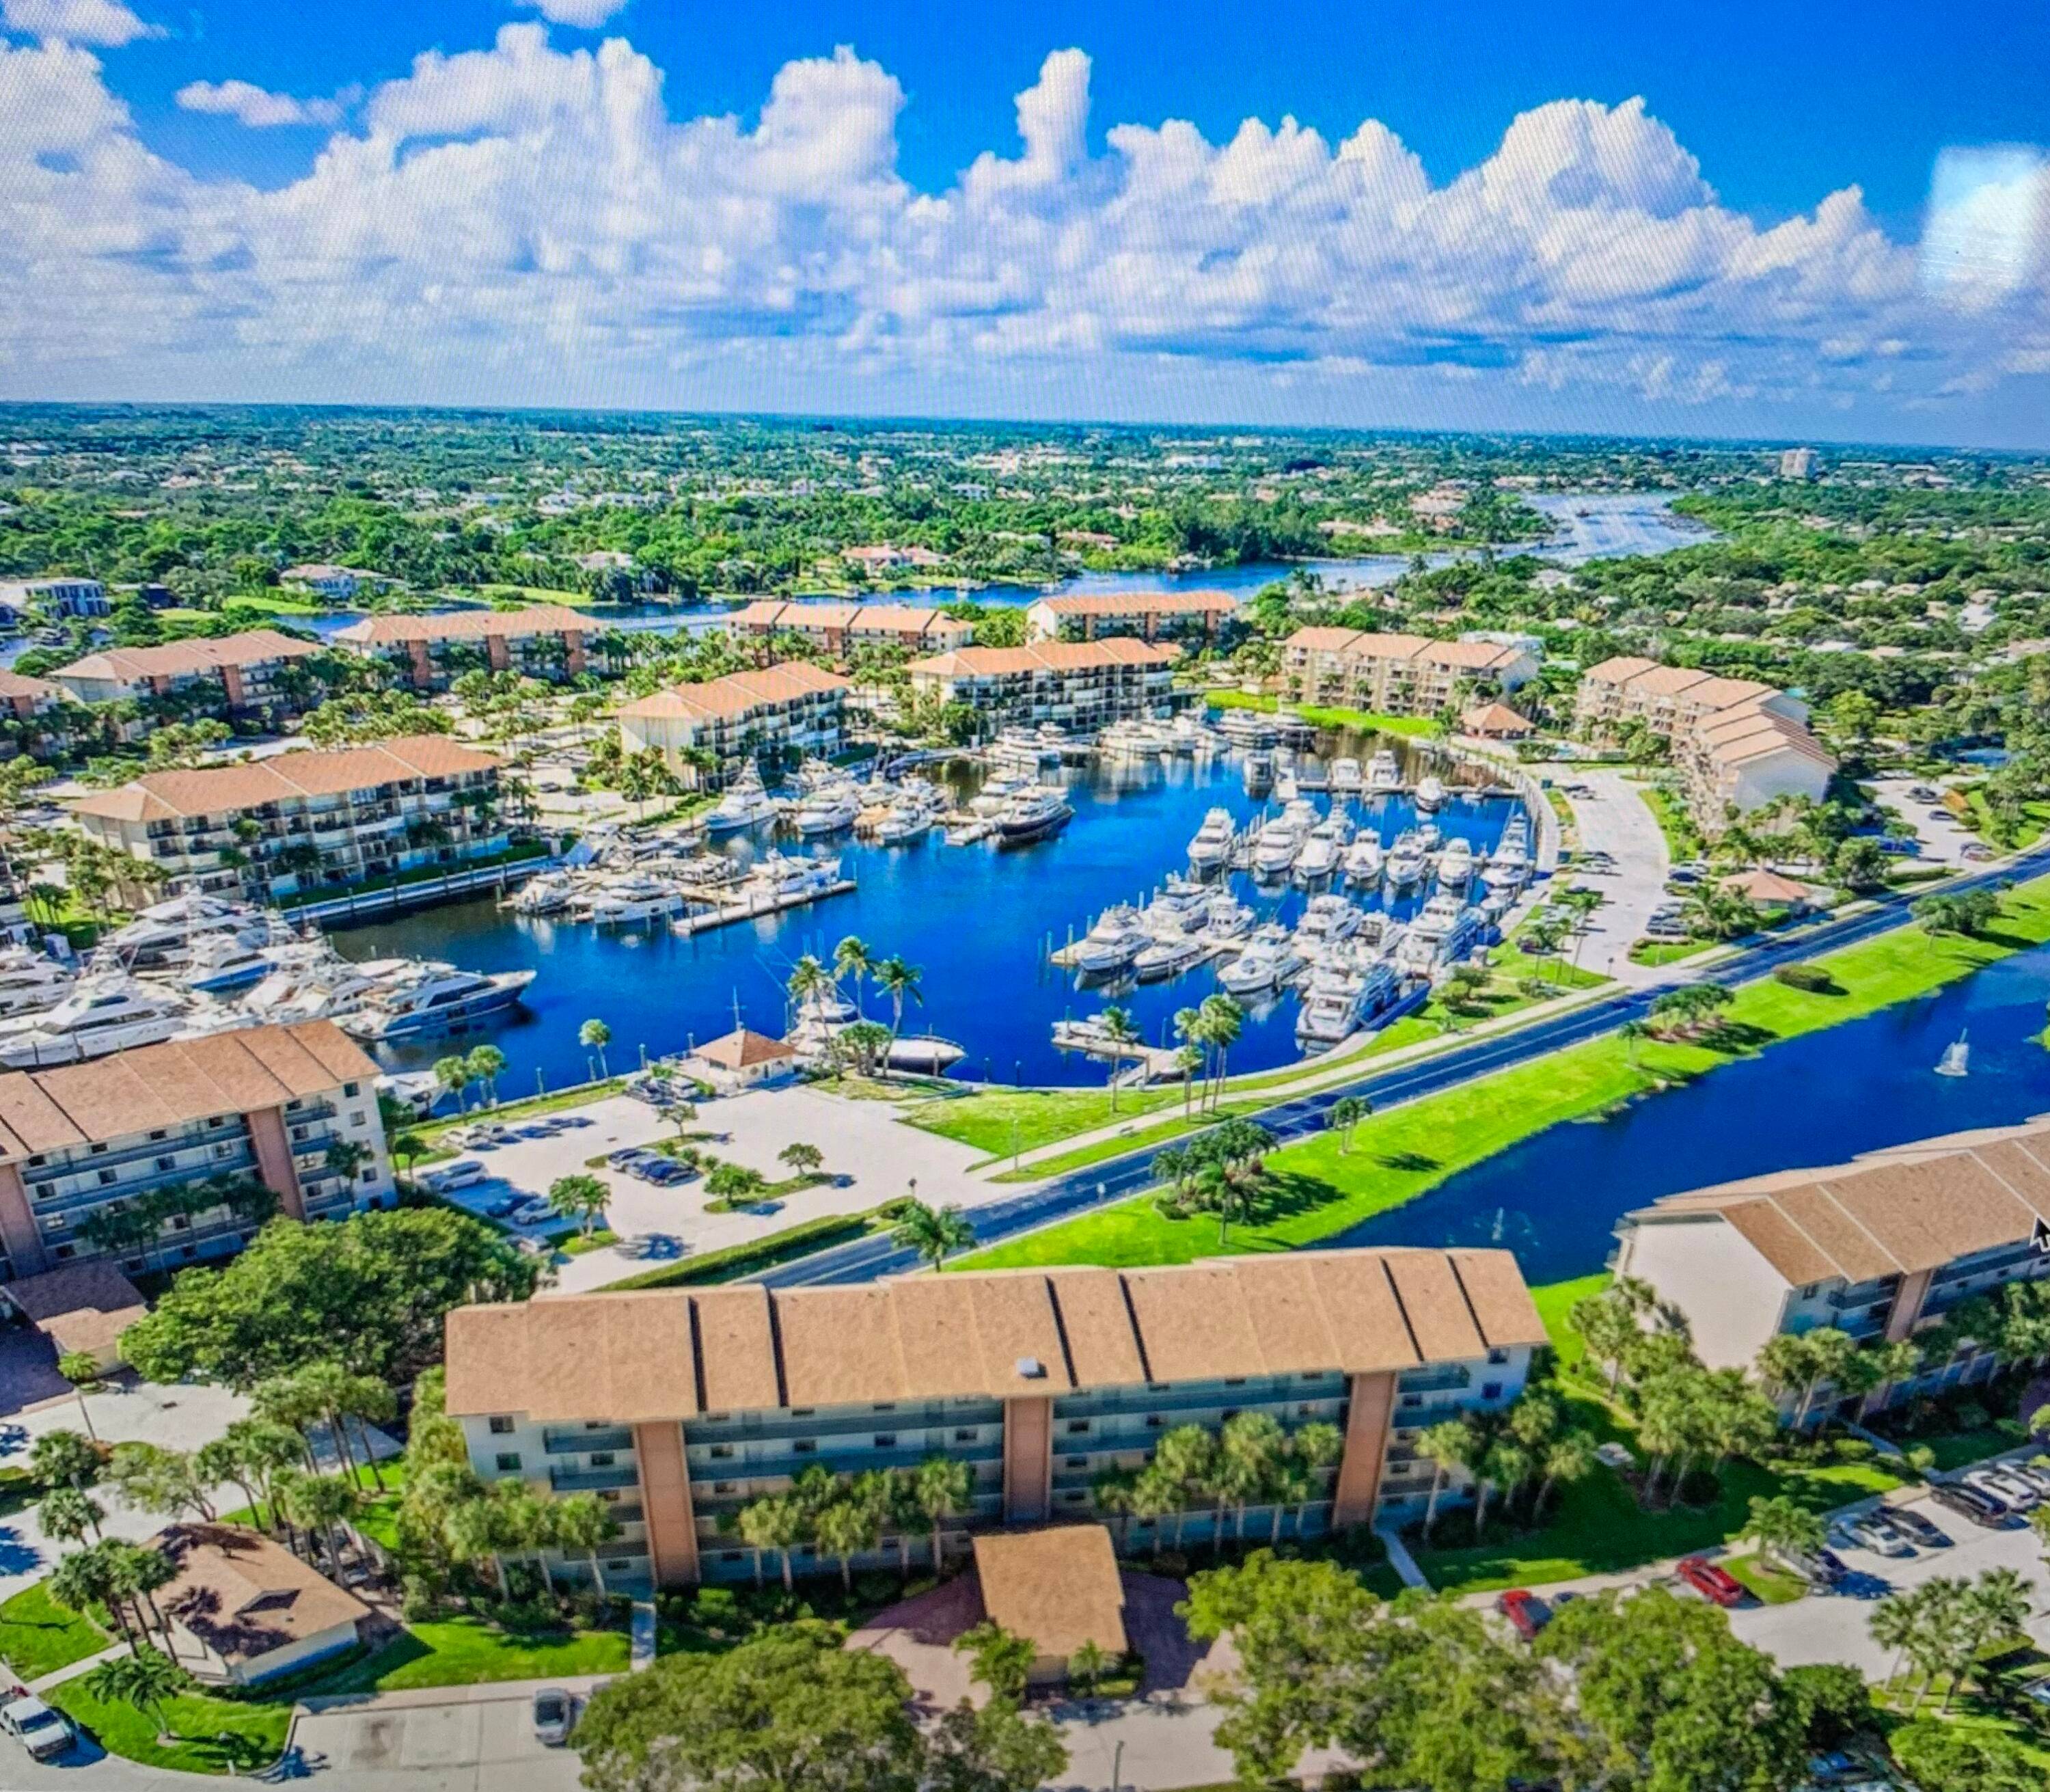 Highly sought after Marina at the Bluffs this condo overlooks the Marina and lake with a spacious covered dining alcove balcony complete with impact resistant sliding glass doors.